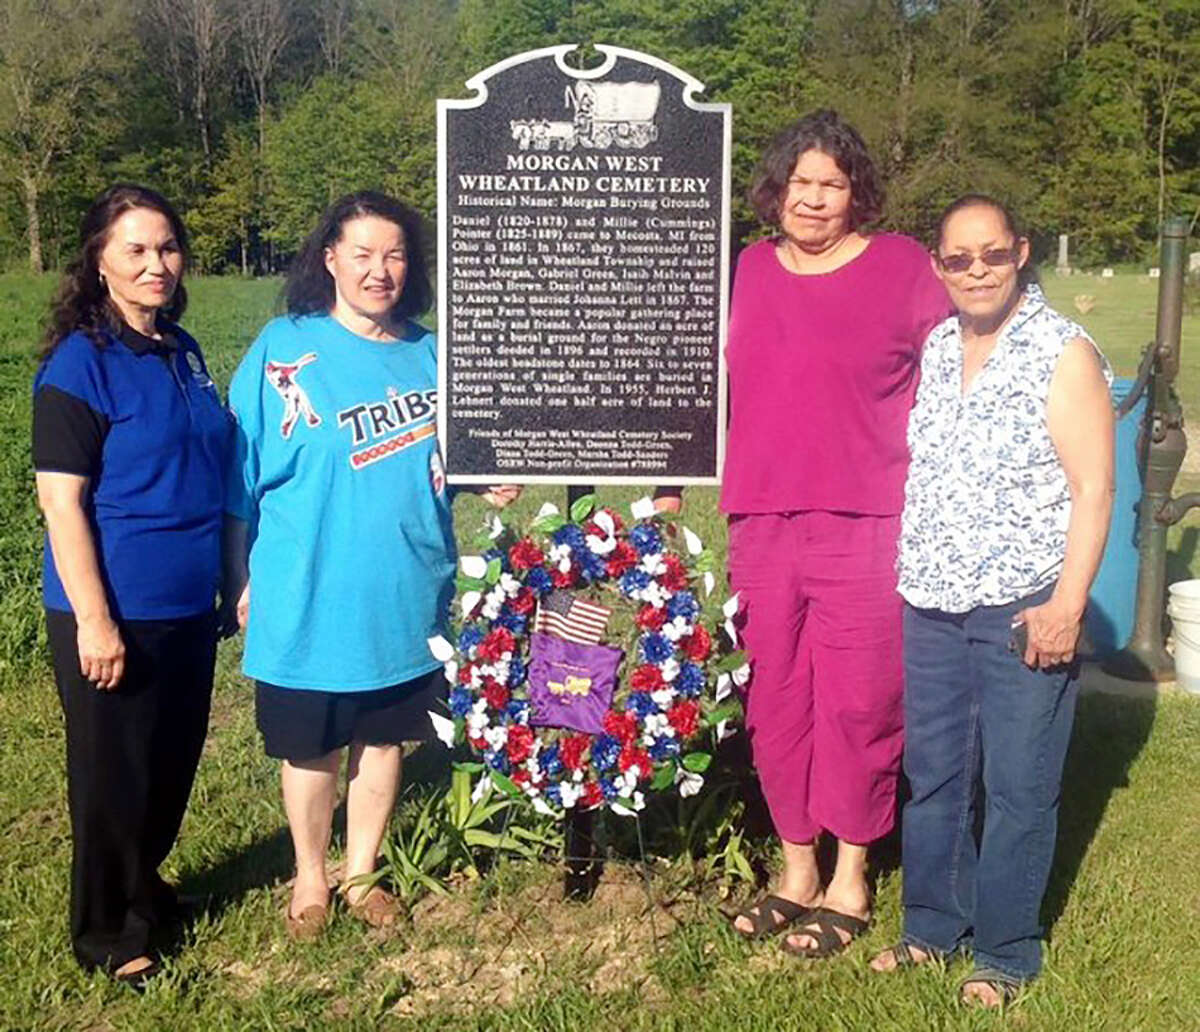 From left, Diana Green, Marsha Sanders, Dorothy Allen and Deonna Green, Friends of Morgan Wheatland and Norman/Cummings Cemetery Society, stands with the newly erected historical marker at Morgan West Wheatland Cemetery in 2014.